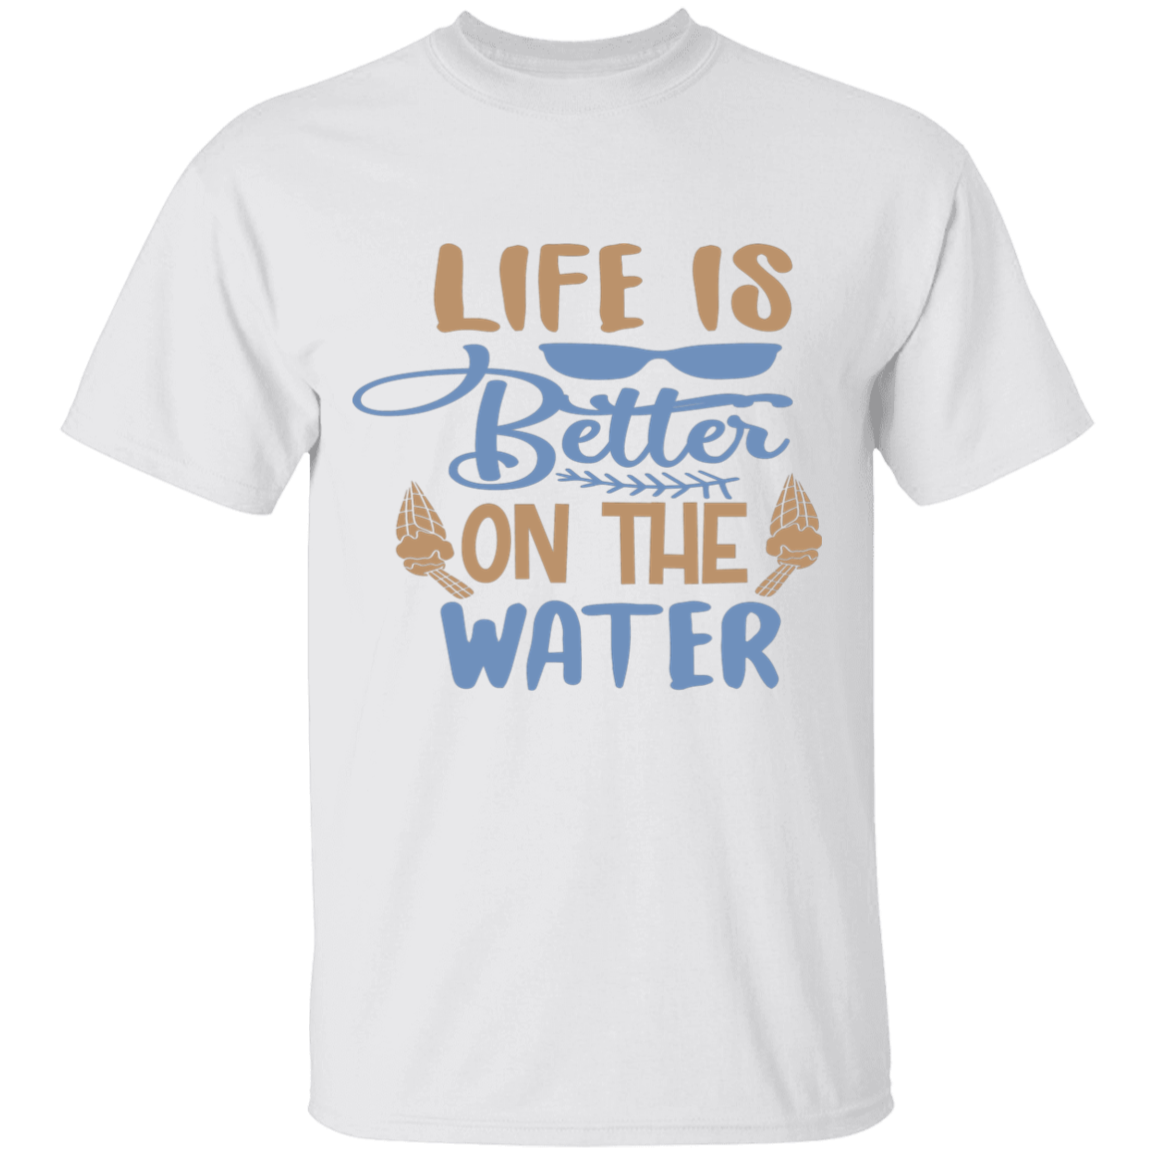 Life's better on the water T-Shirt